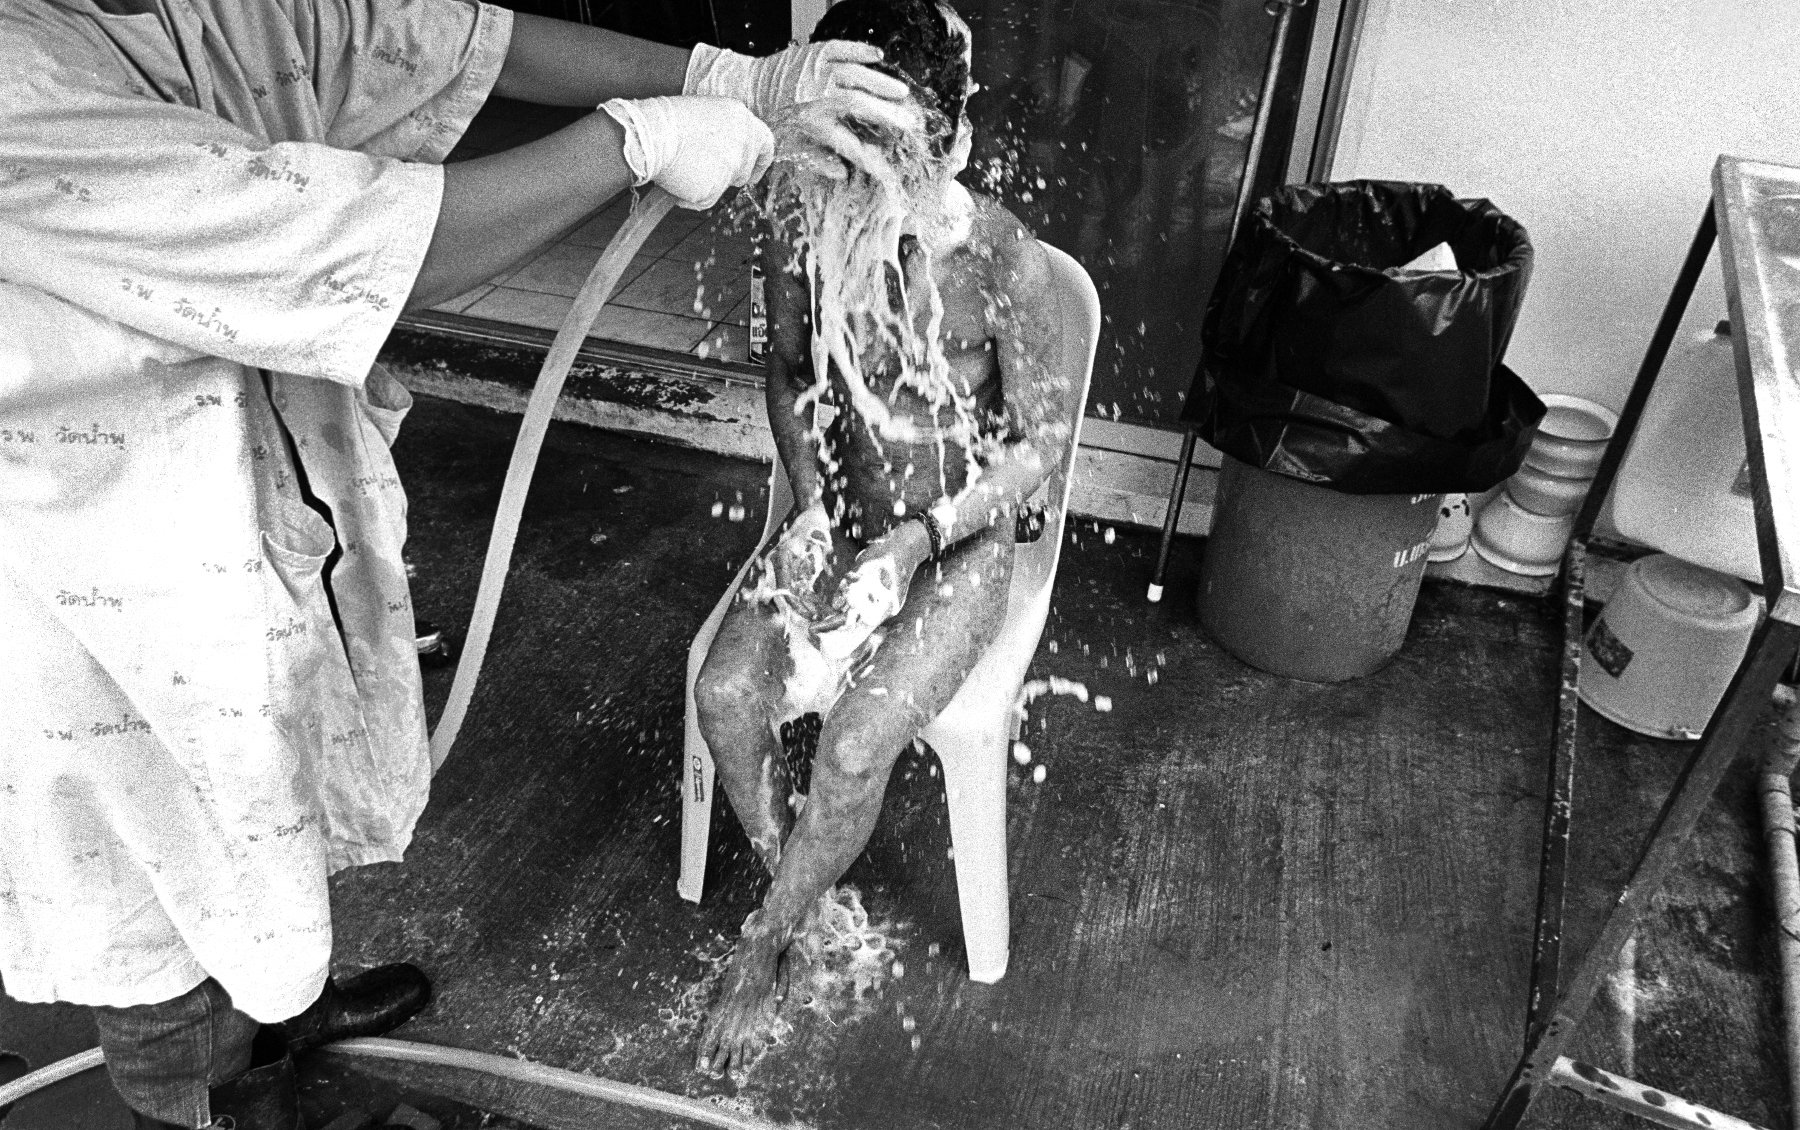  “Care” A volunteer carer bathes a patient at Wat Prabat Nampu. Wat Prabat Nampu is a Buddhist temple and a hospice for those living with HIV. Lopburi, Thailand. 2003. 